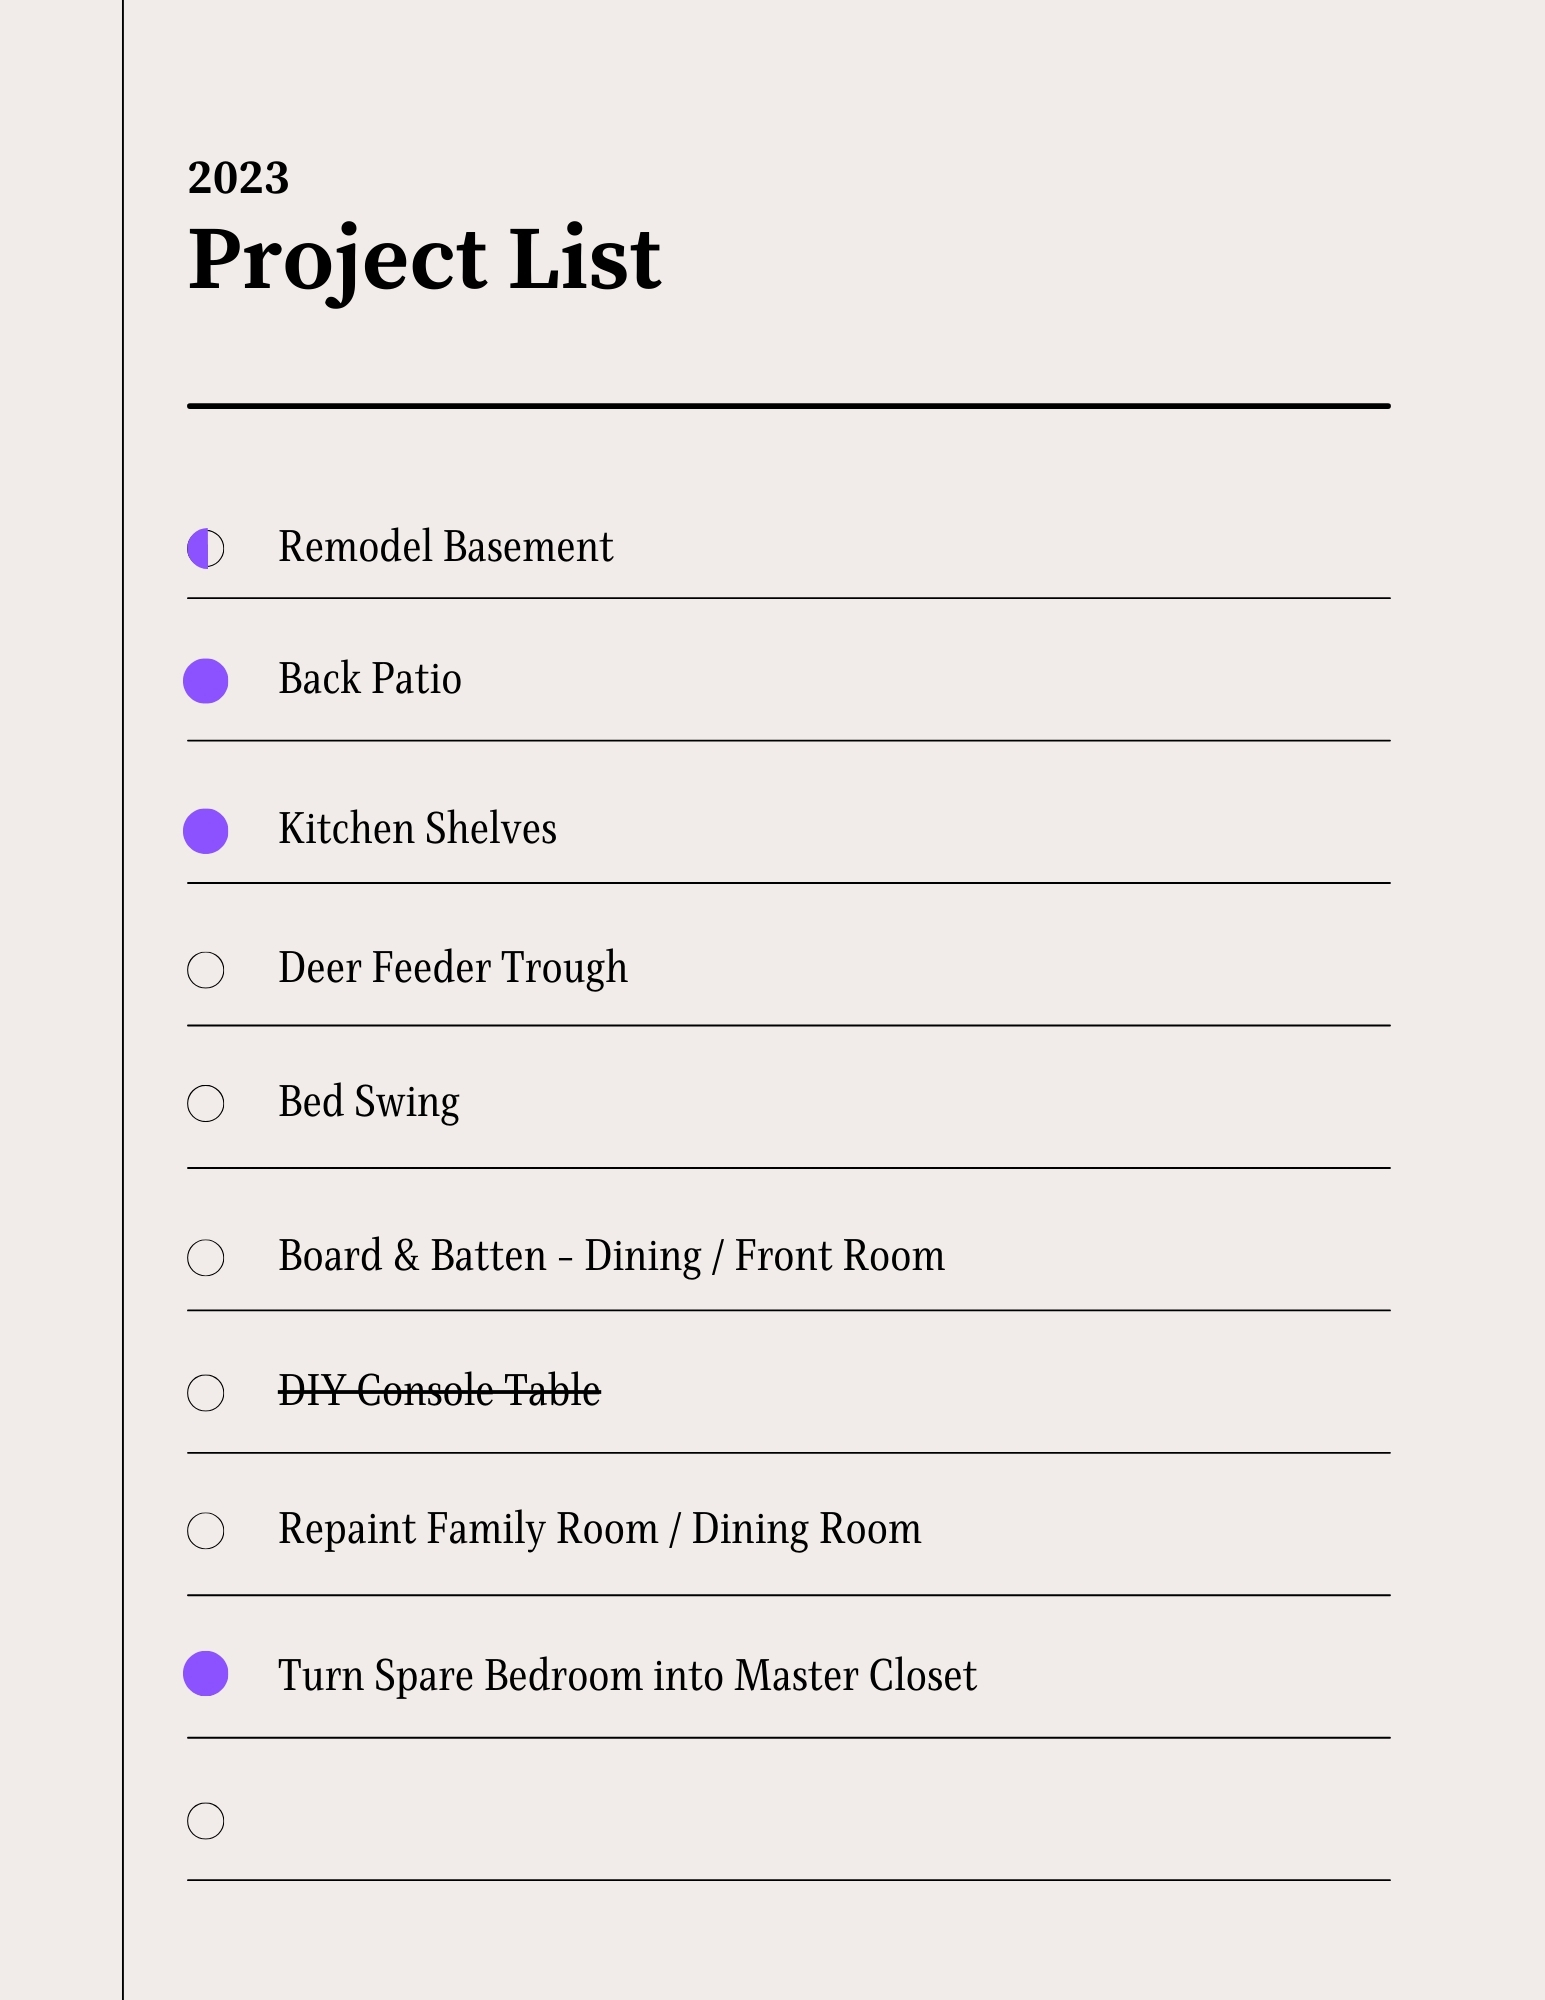 2023 Project List Completion